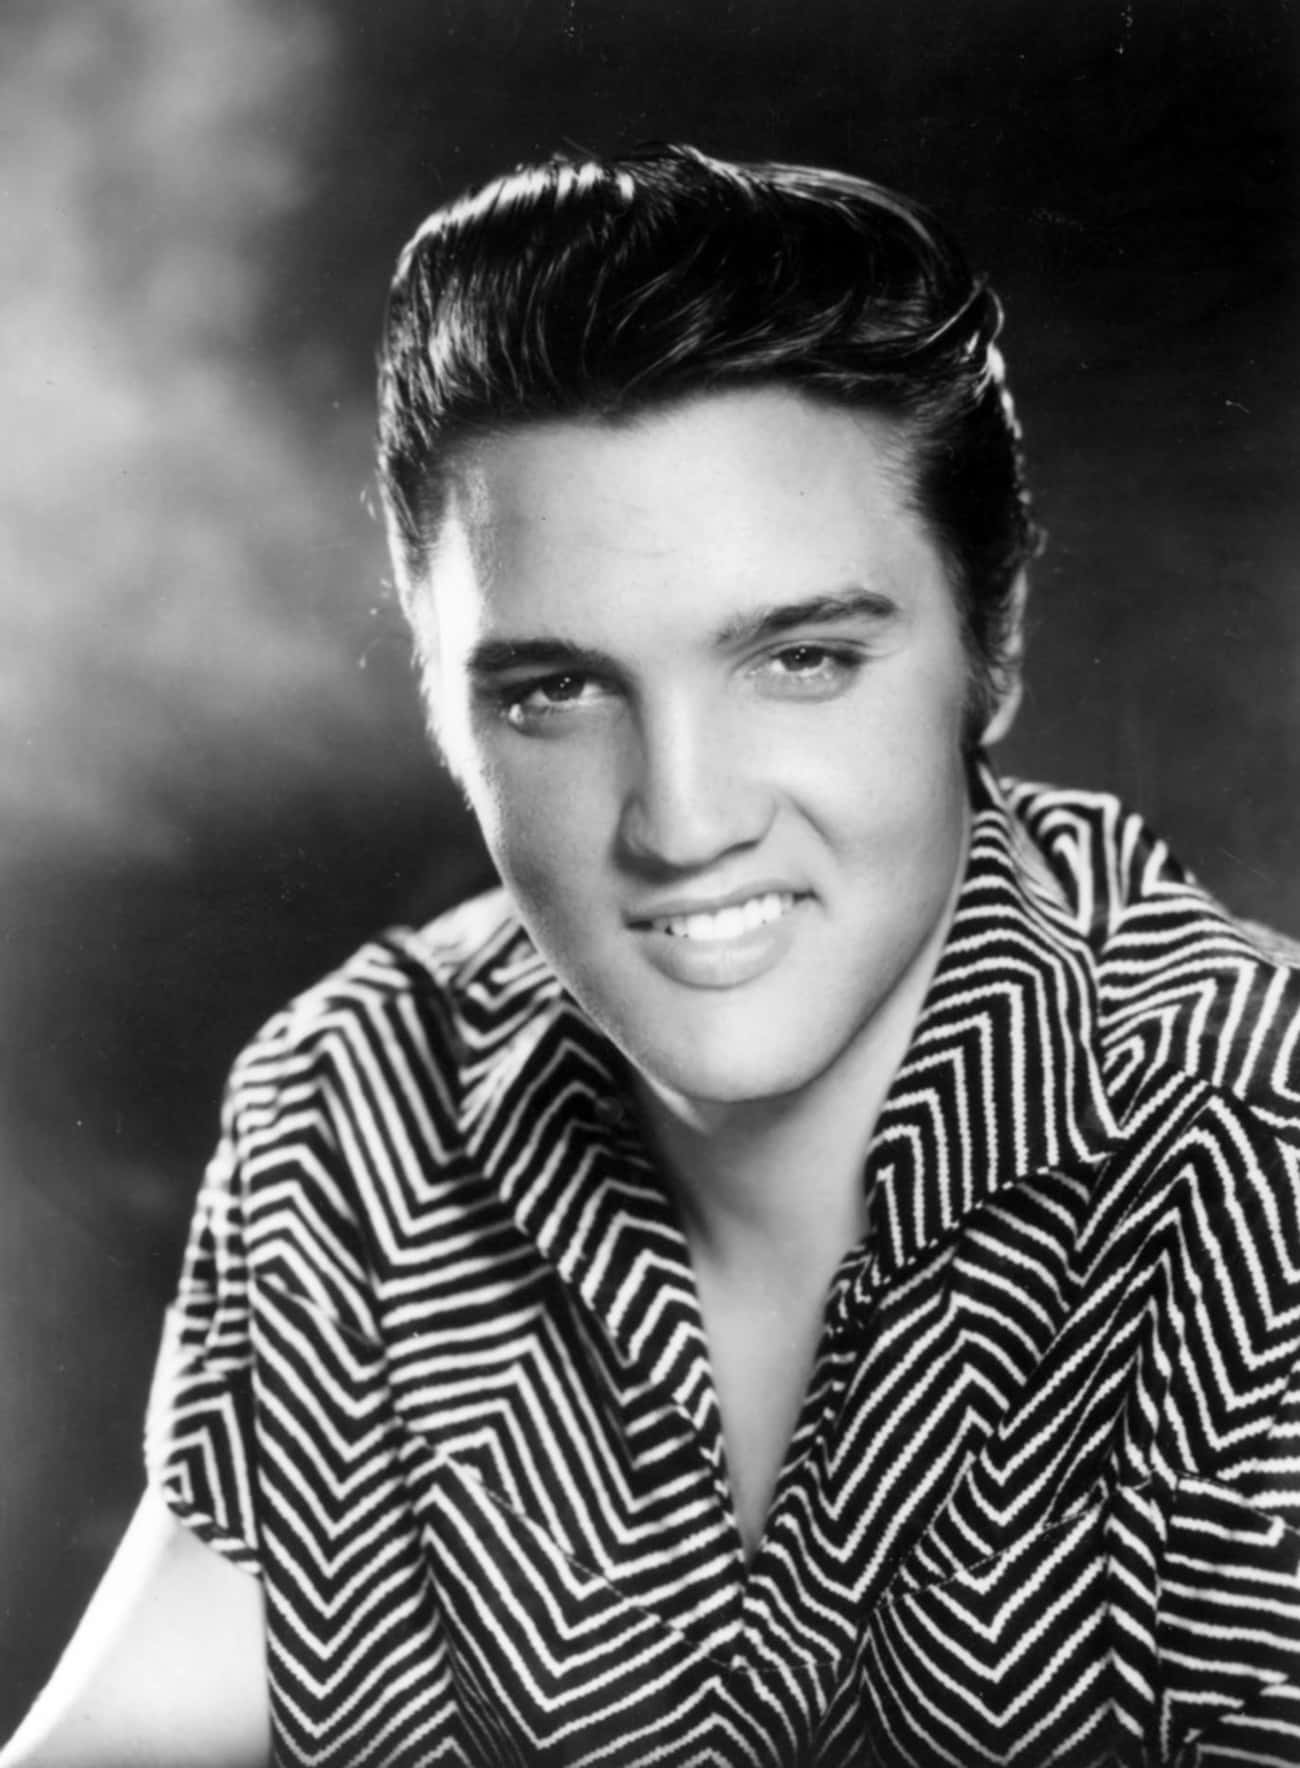 Young Elvis Presley in Black and White Patterned Shirt